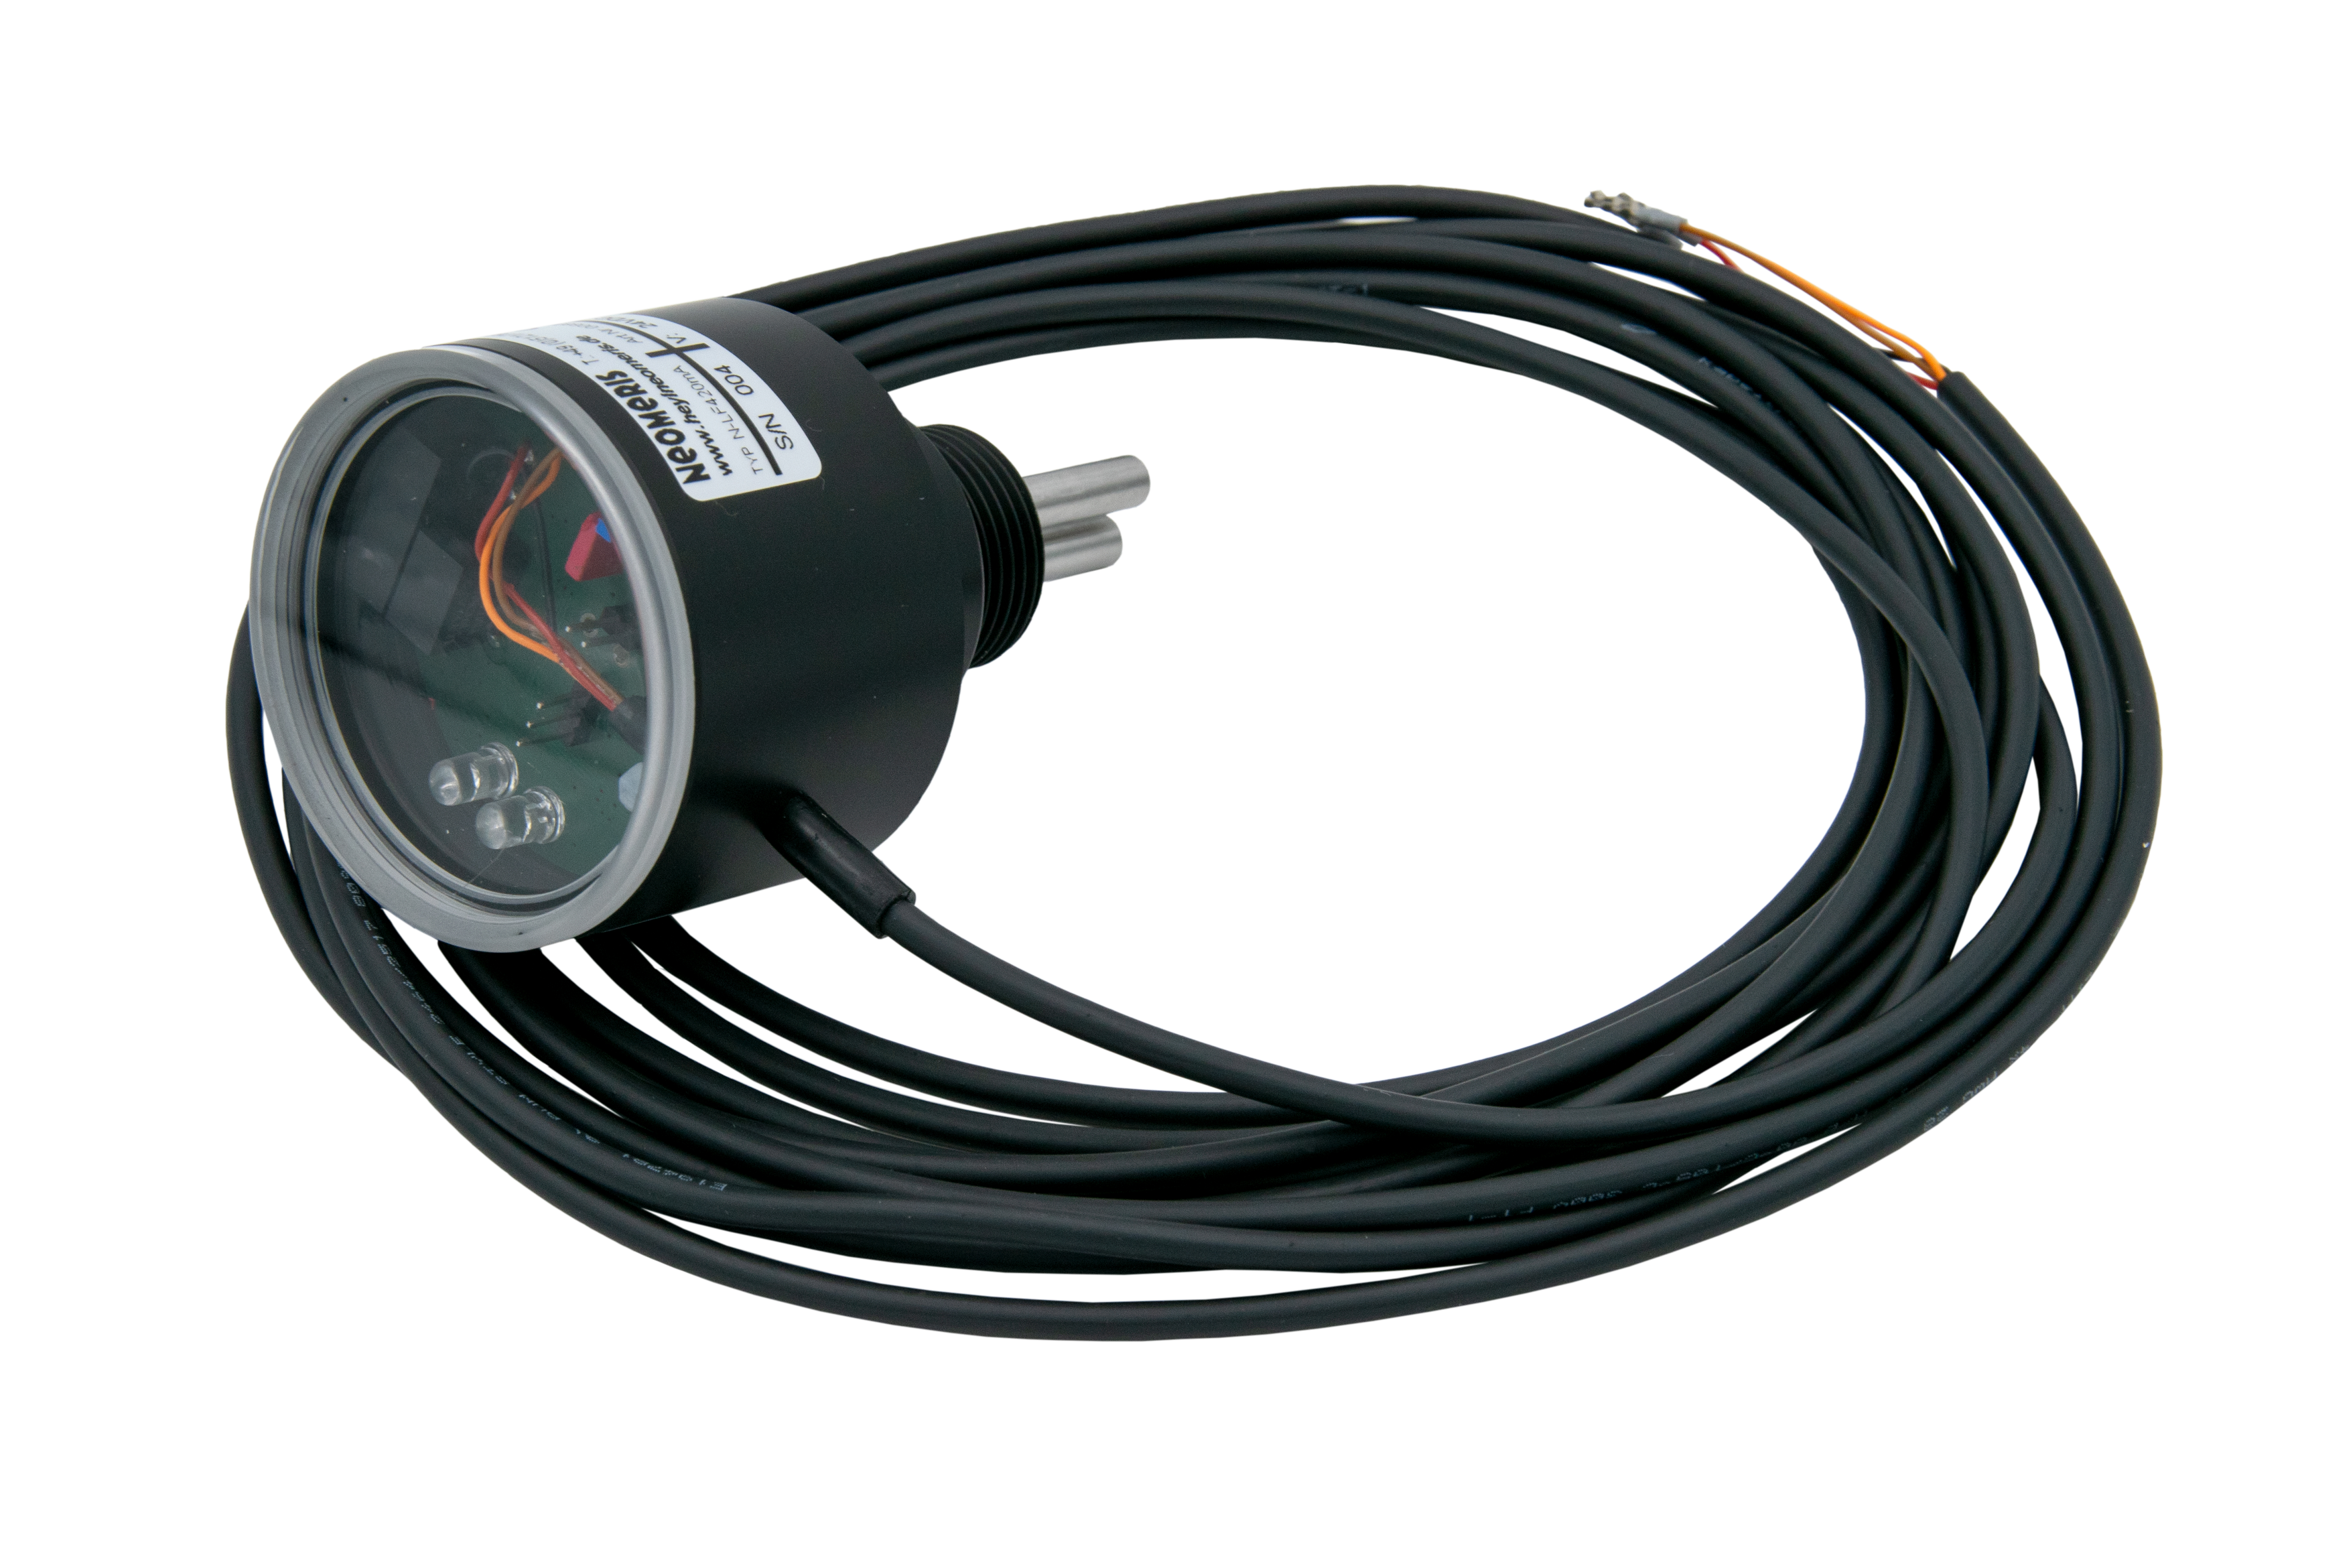 N-LF420 0-2000µS conductivity meter with 4-20mA output, LED display as required and 3/4 inch screw-in thread